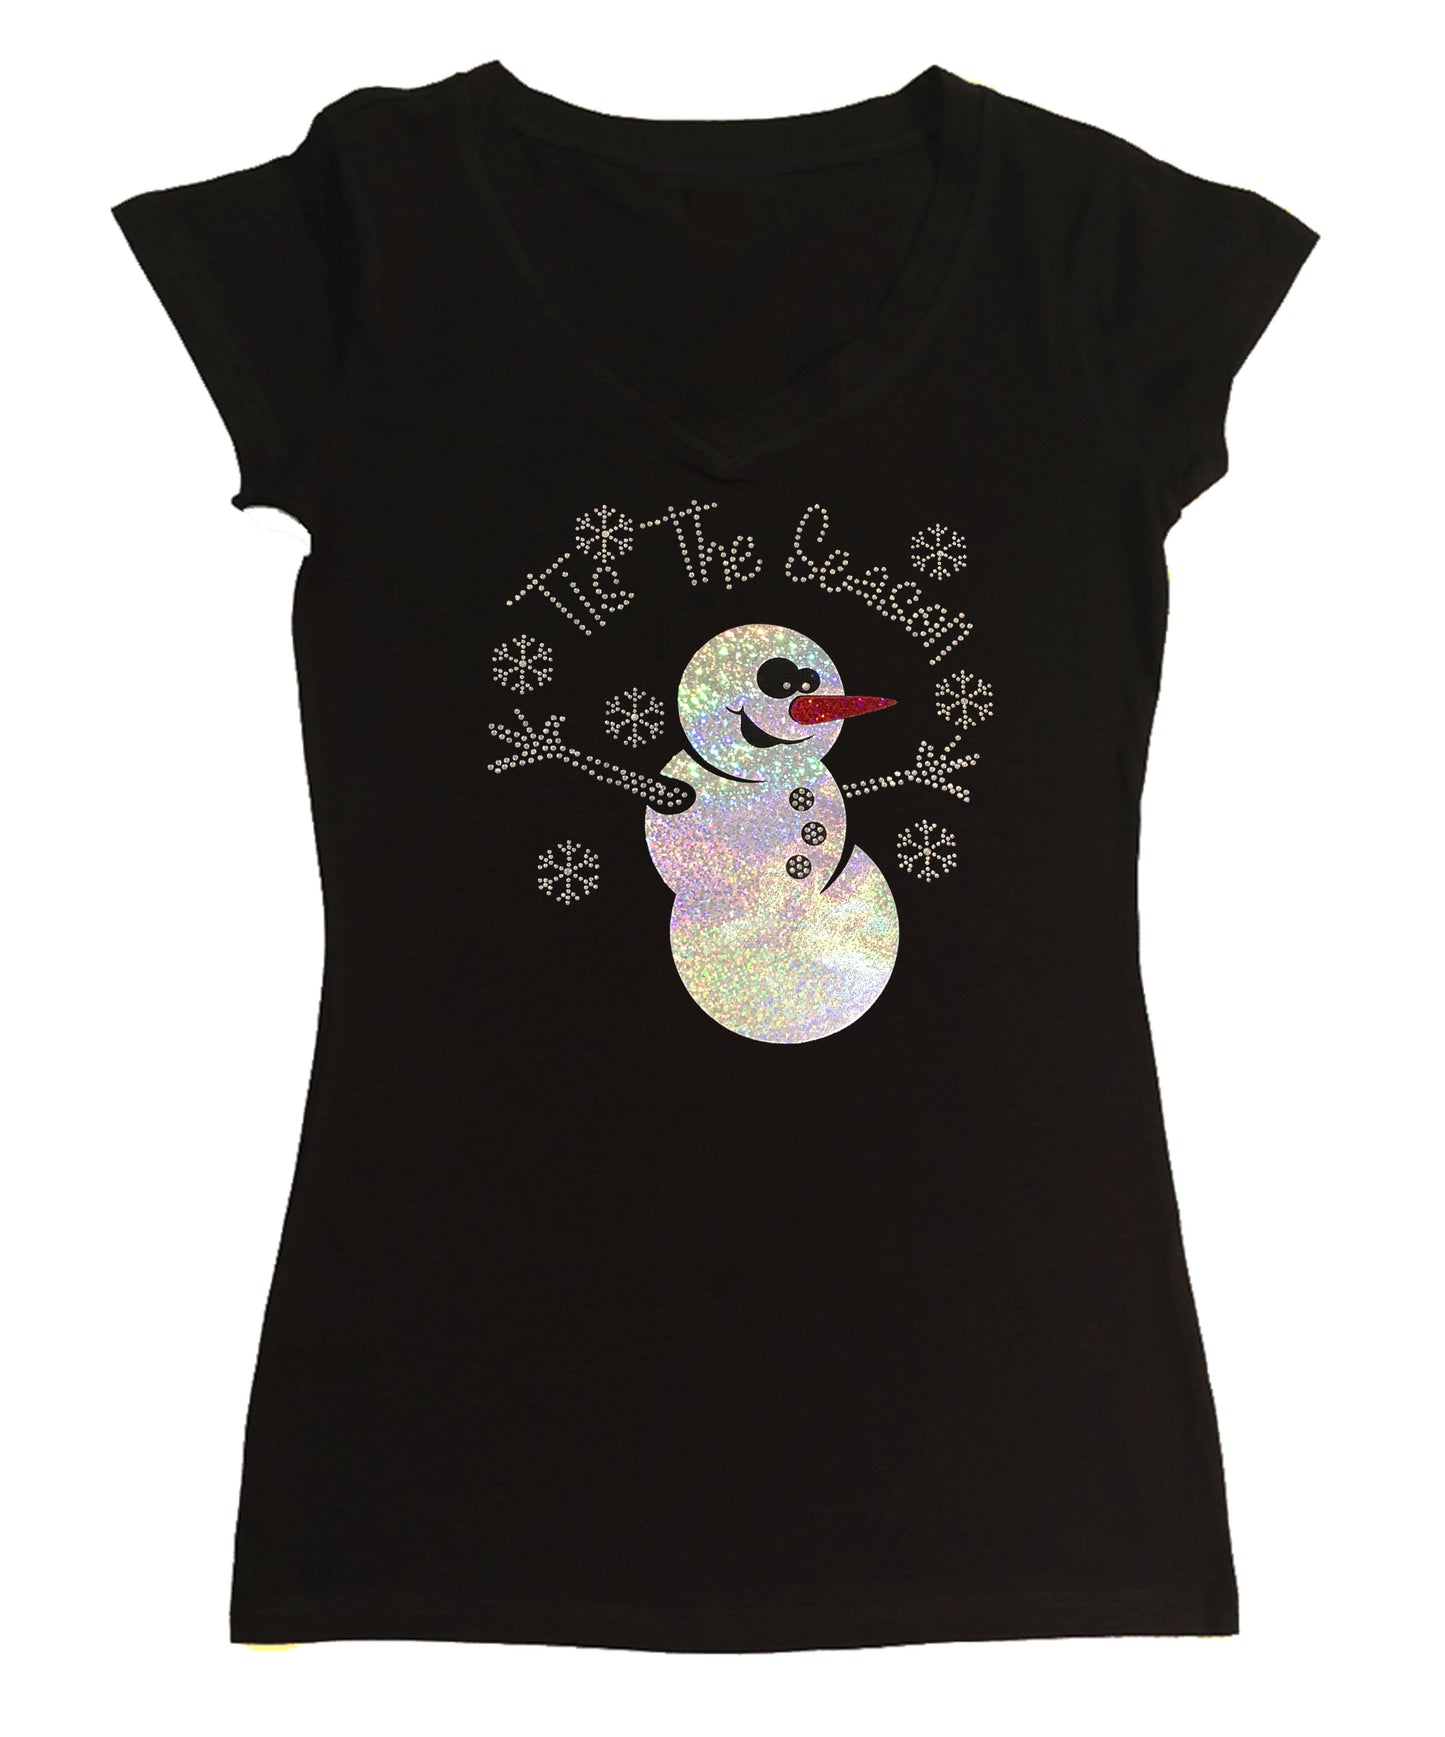 Womens T-shirt with It's the Season Snowman